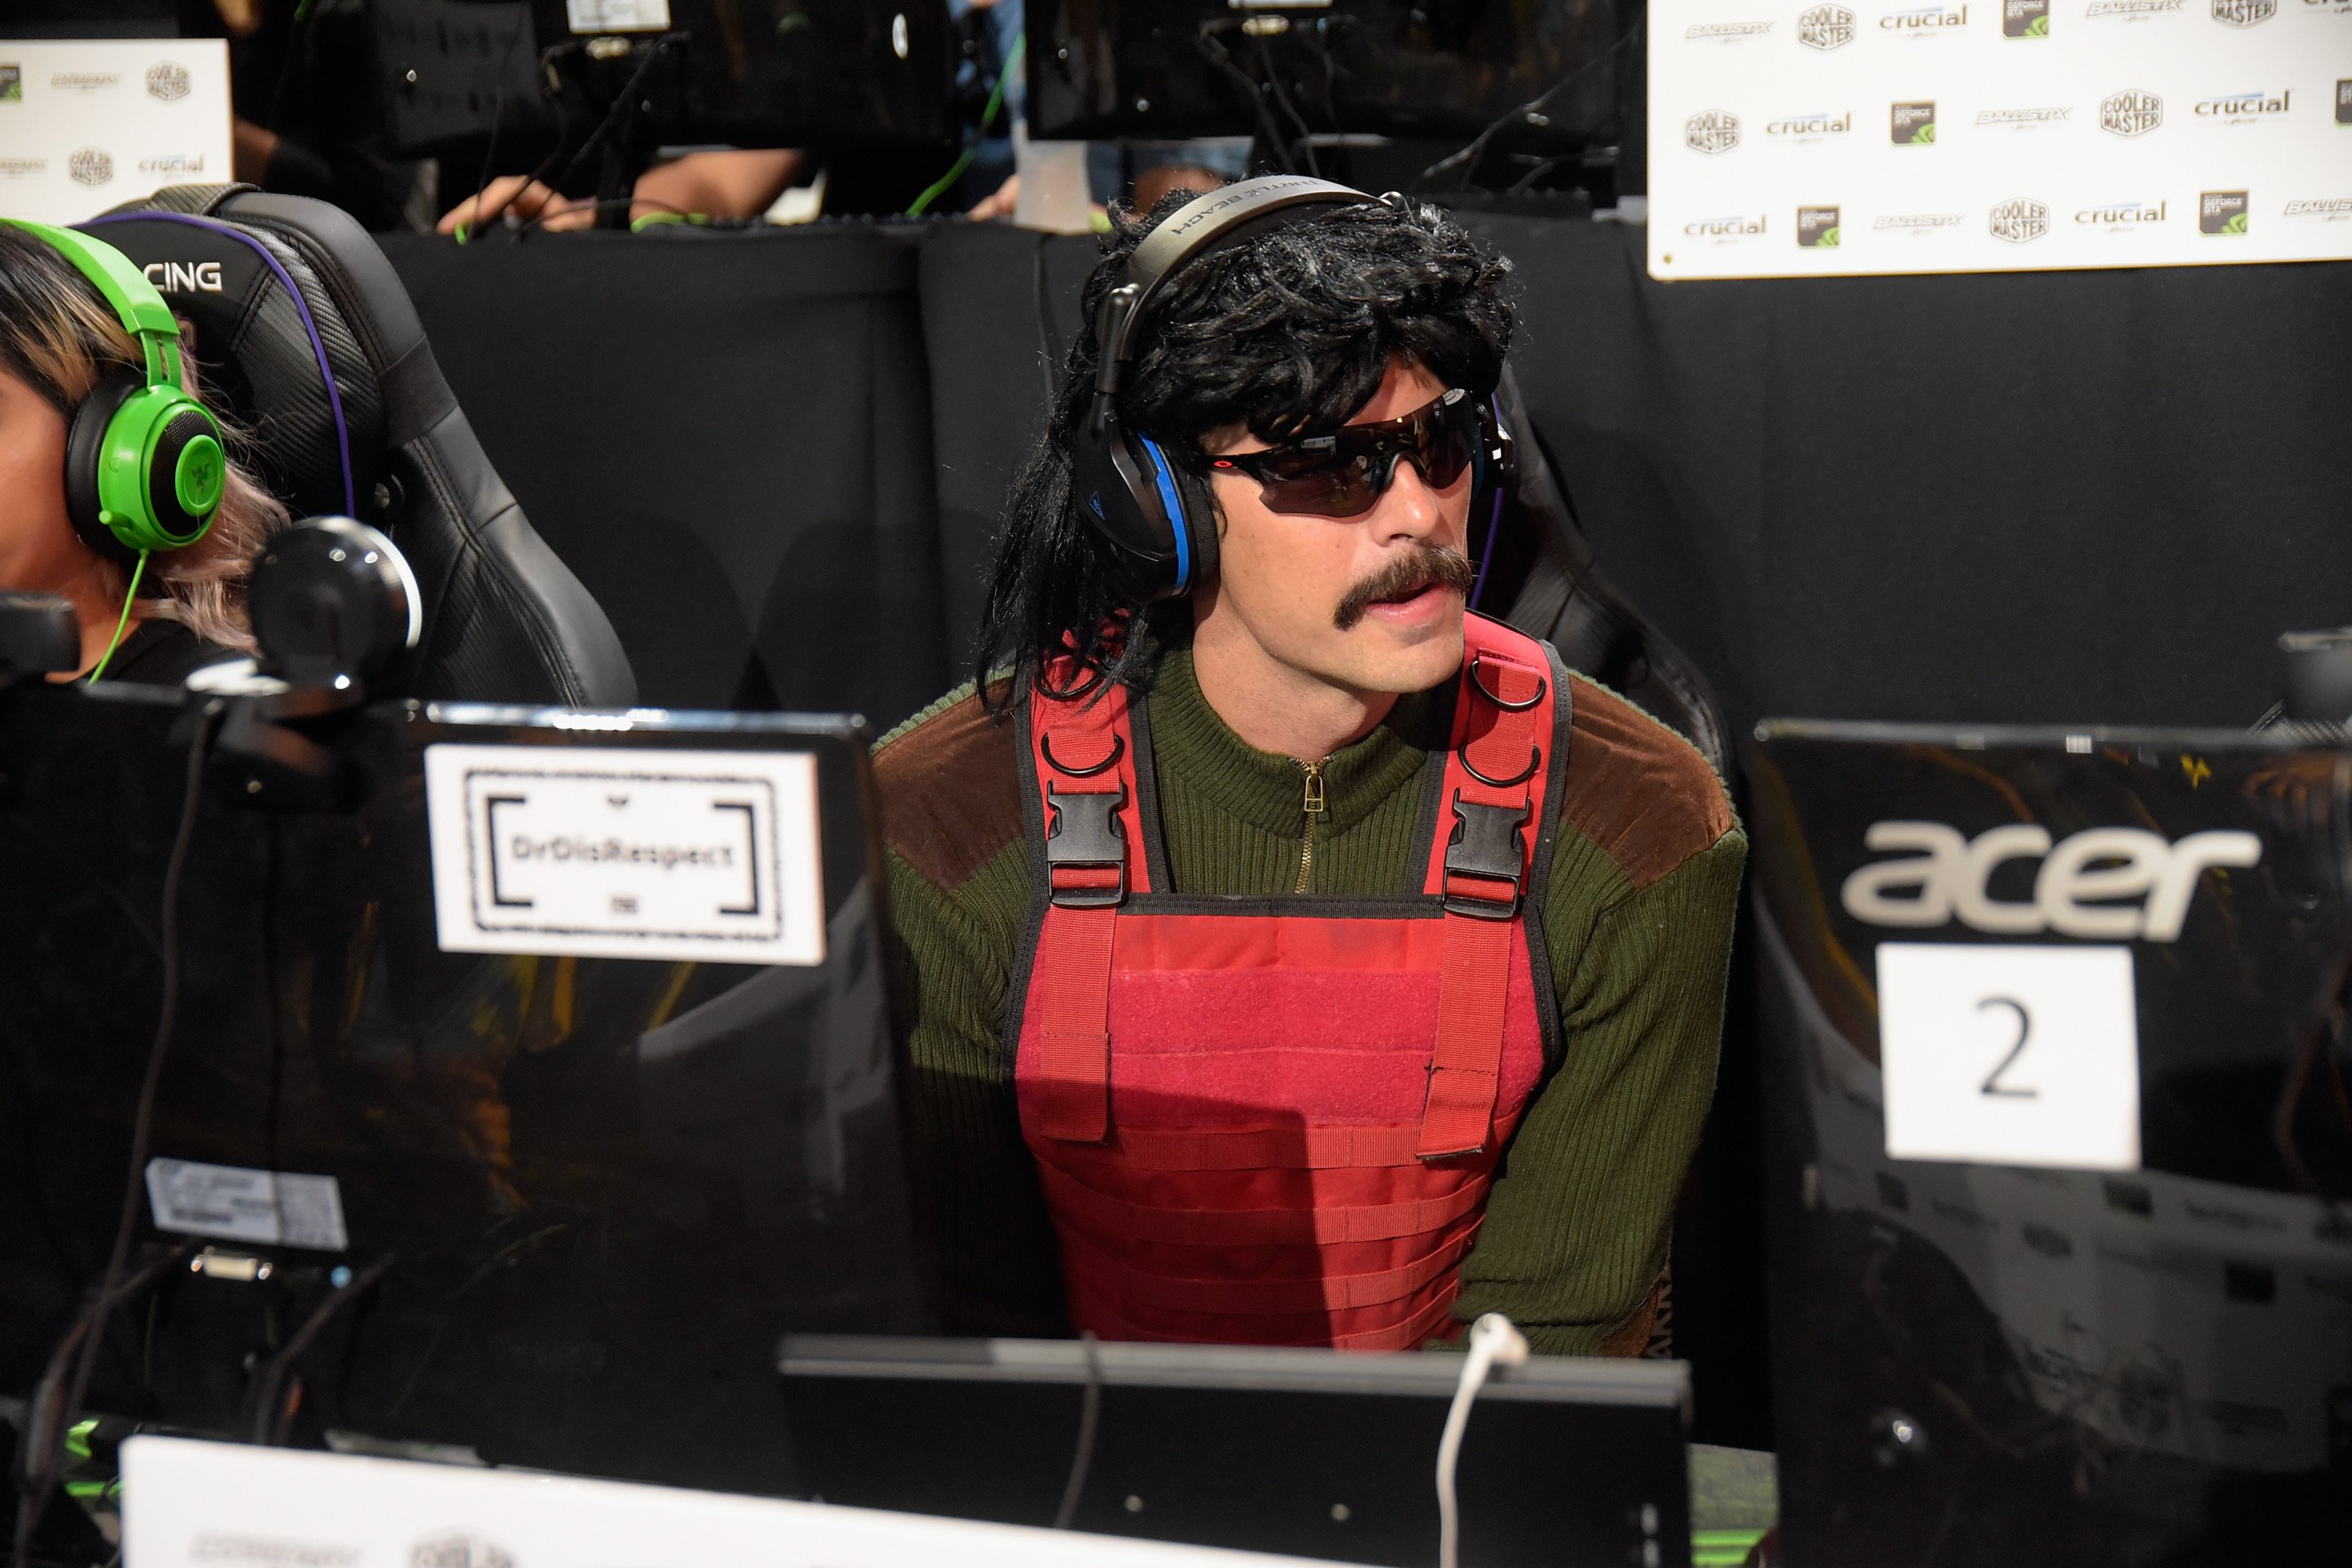 Gamer Dr DisRespect gets interviewed at the Twitch Prime and PUBG Battlegrounds Squad Showdown gaming event on July 13, 2018 in Los Angeles, California